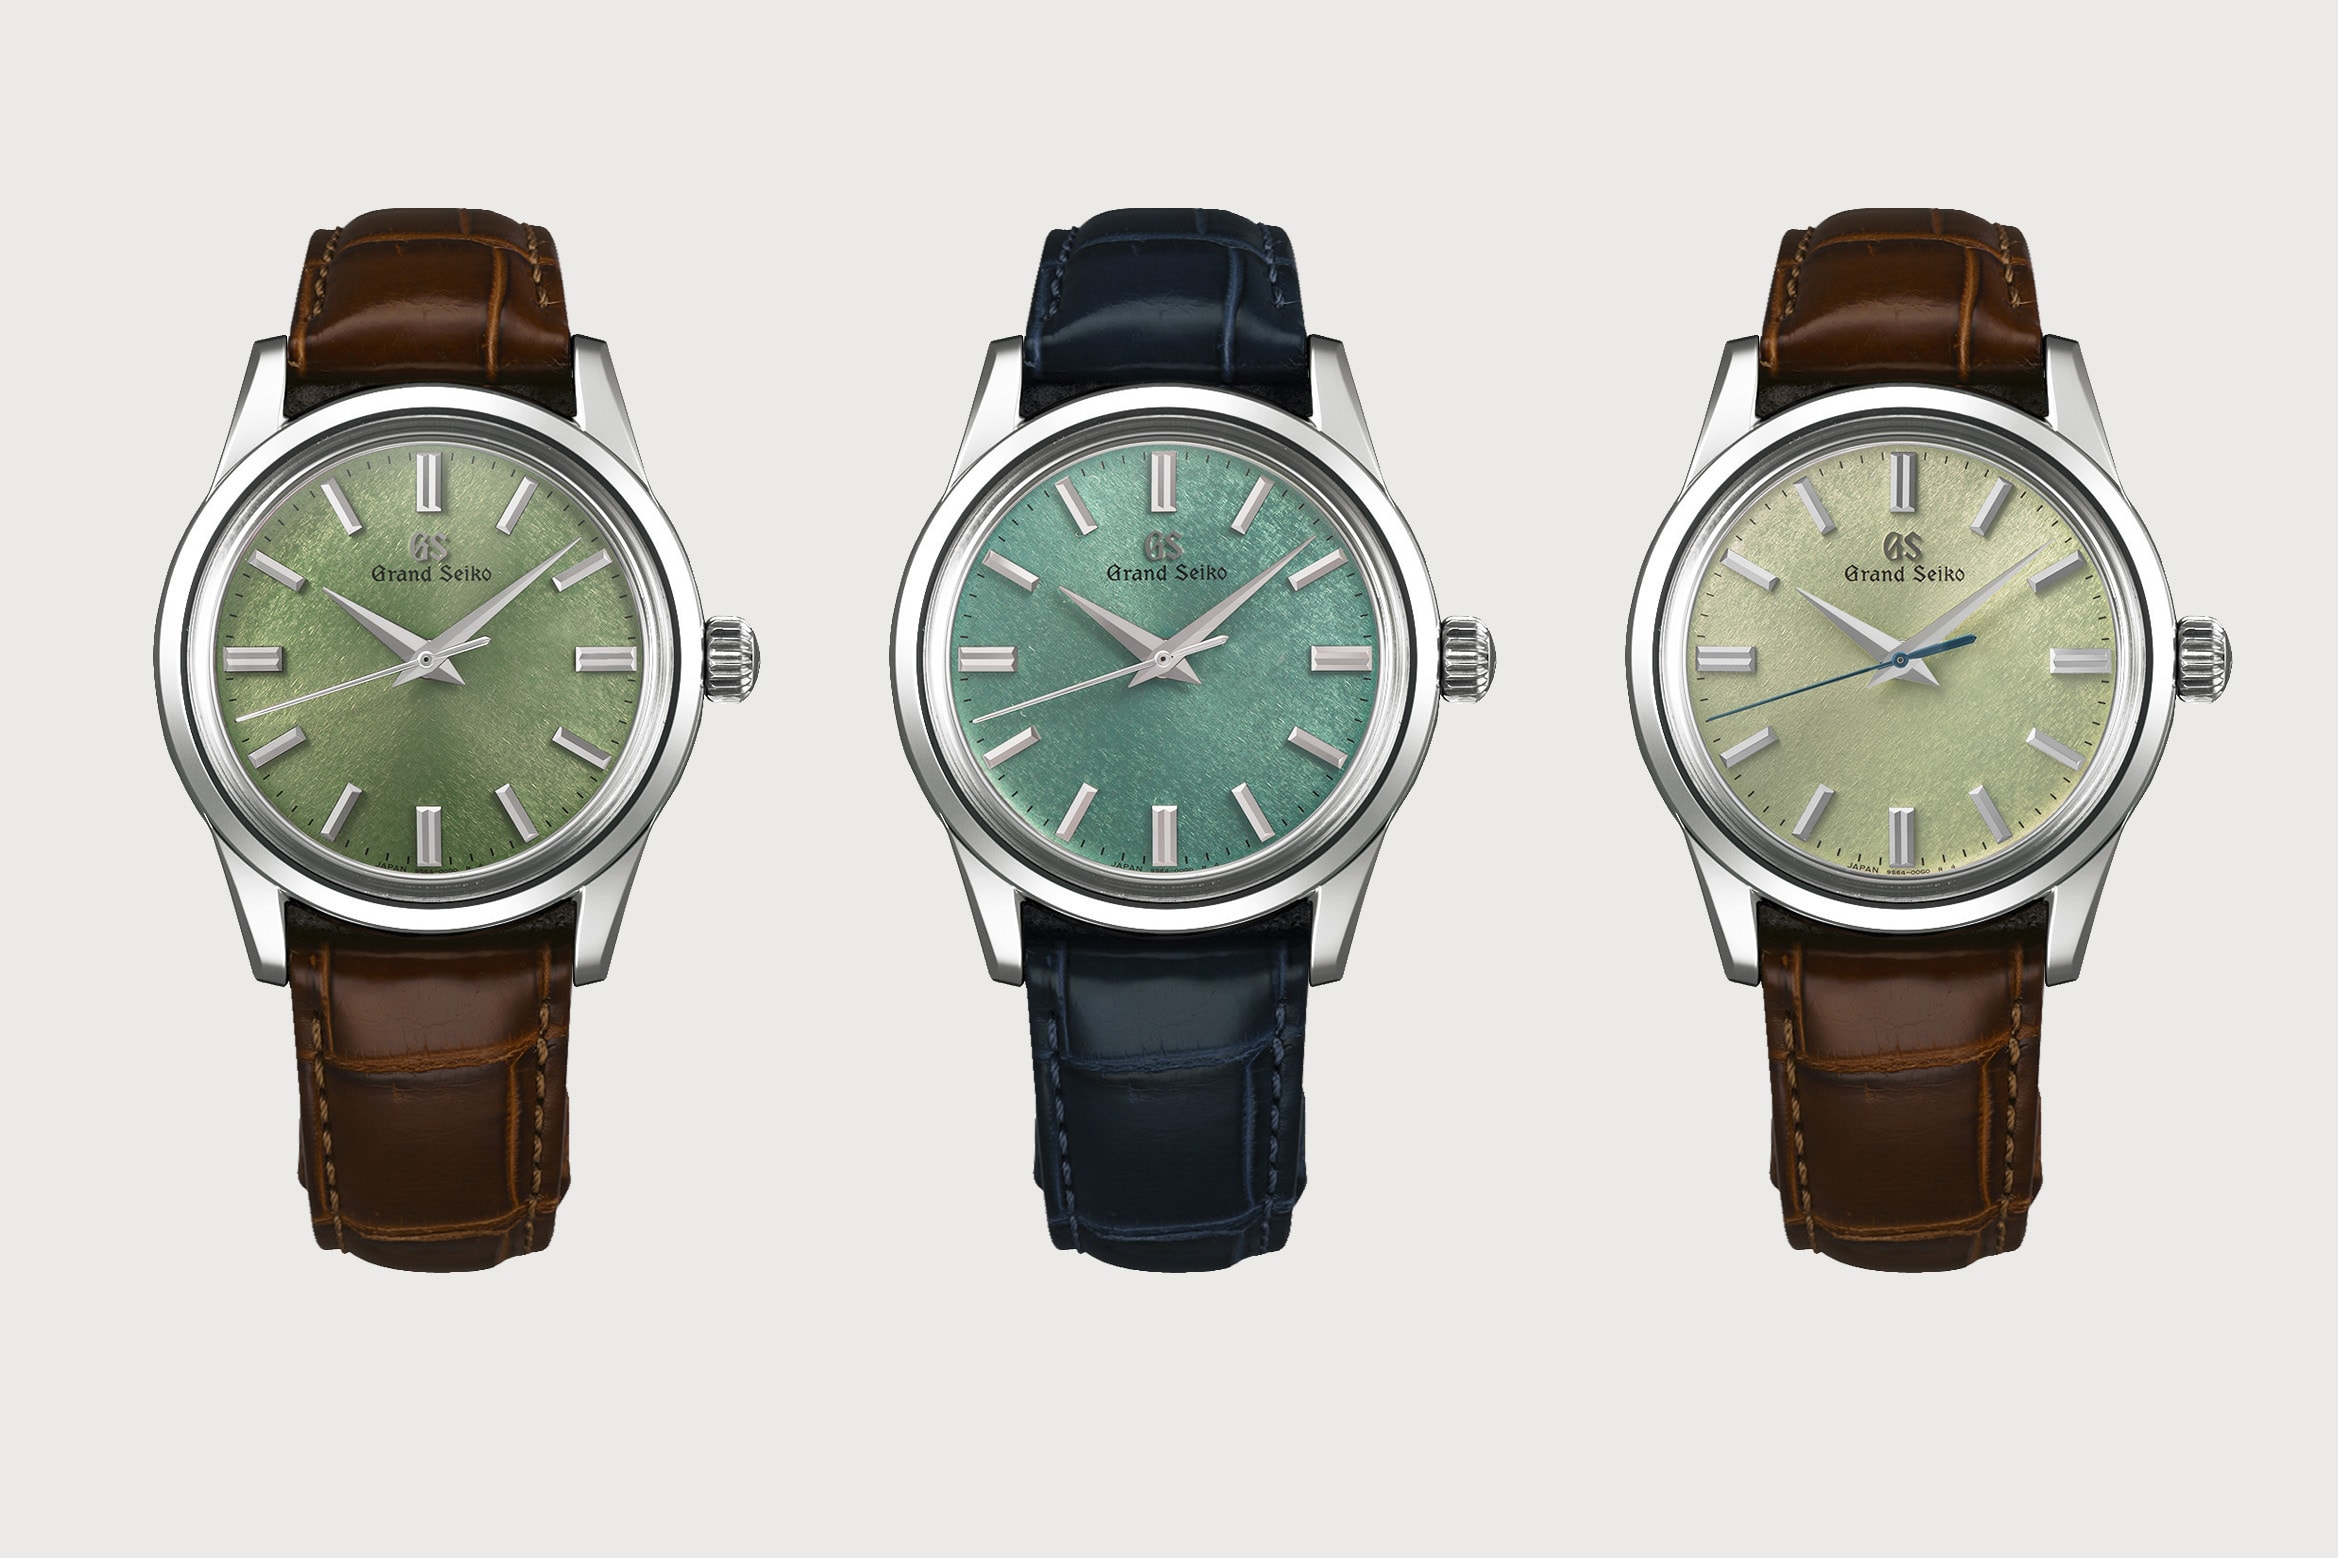 Worn & Wound - The Classic Grand Seiko Hand Winder Gets Some Color In New,  US Exclusi